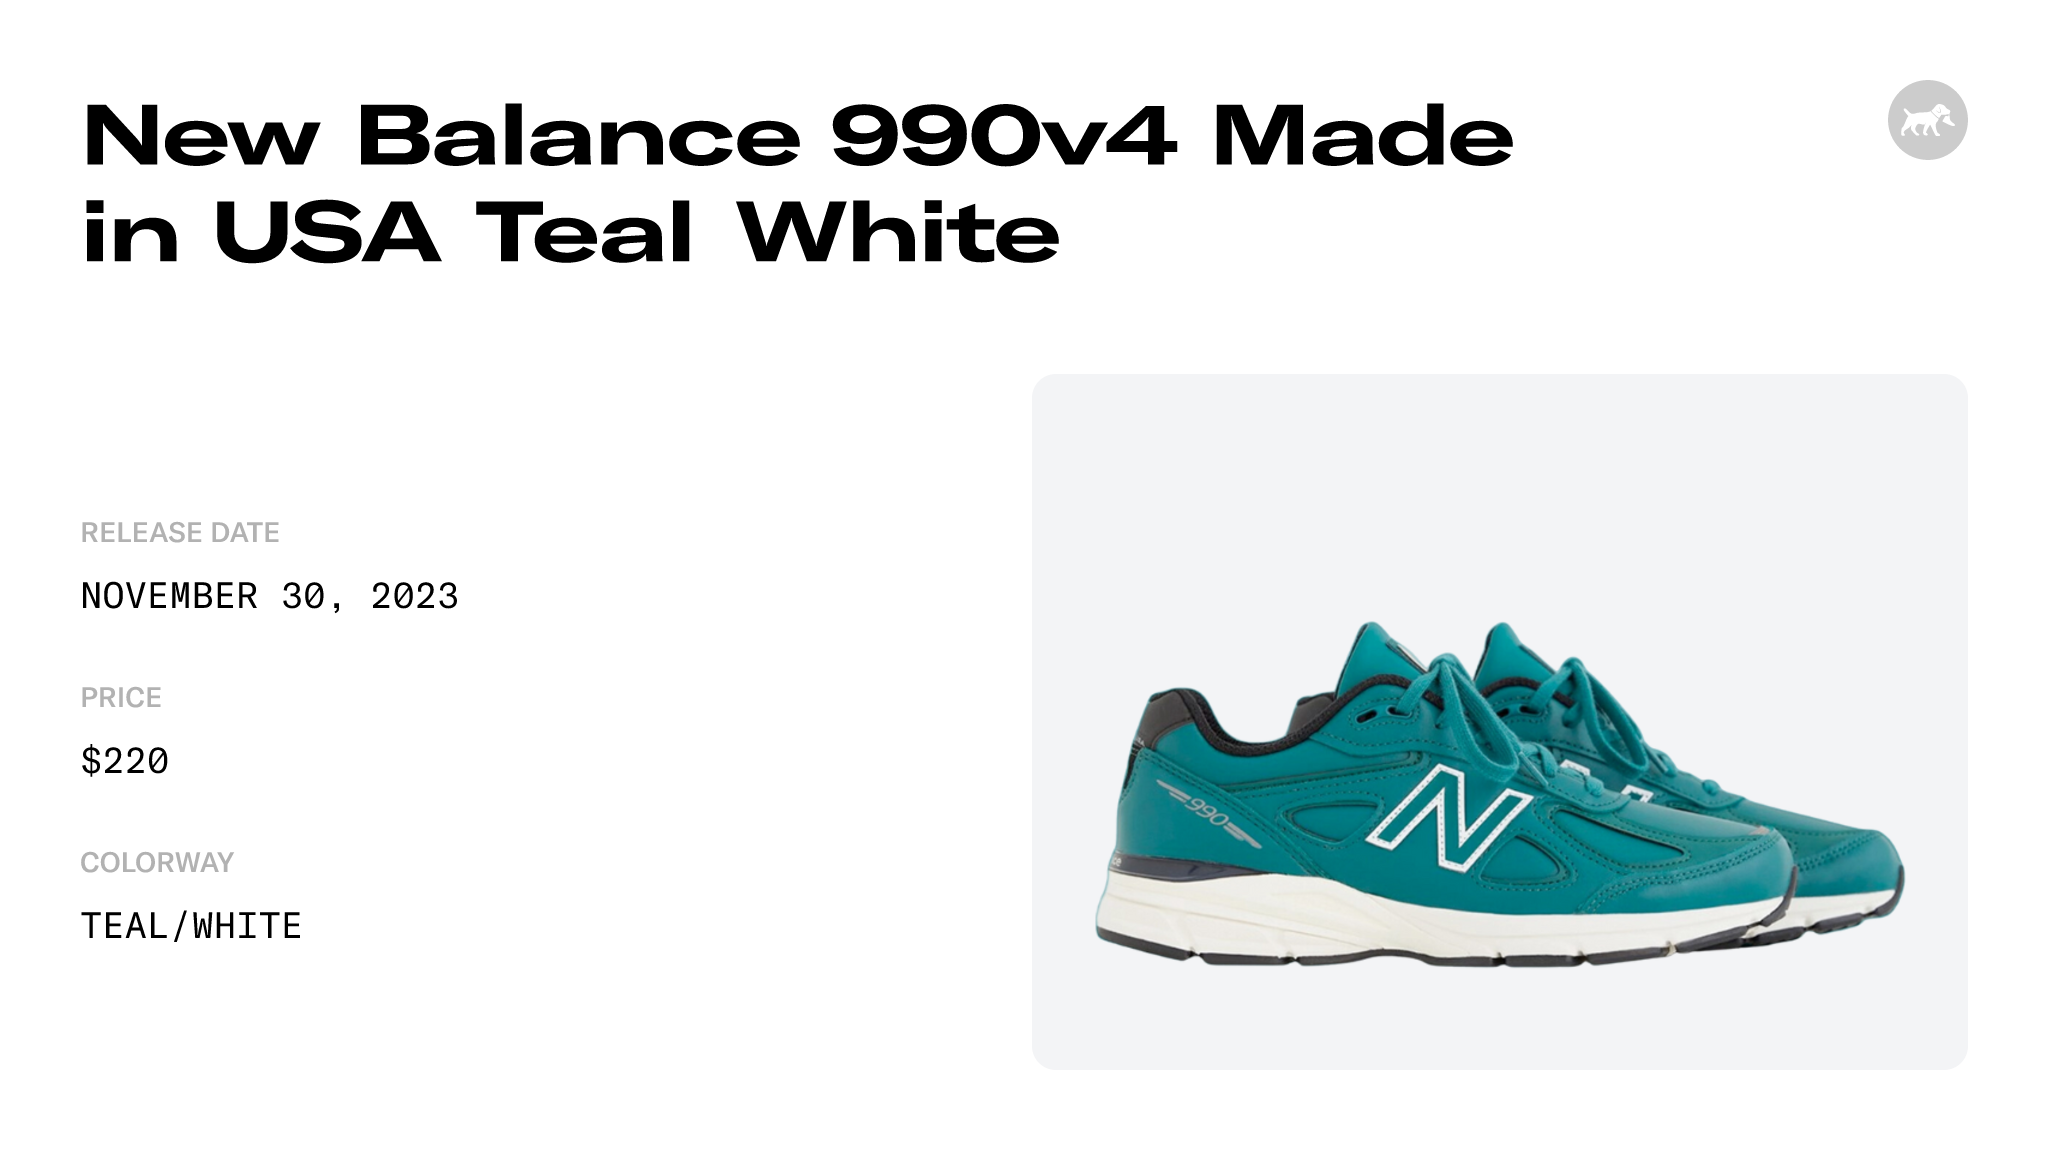 New Balance 990v4 Made in USA Teal White - U990TW4 Raffles and